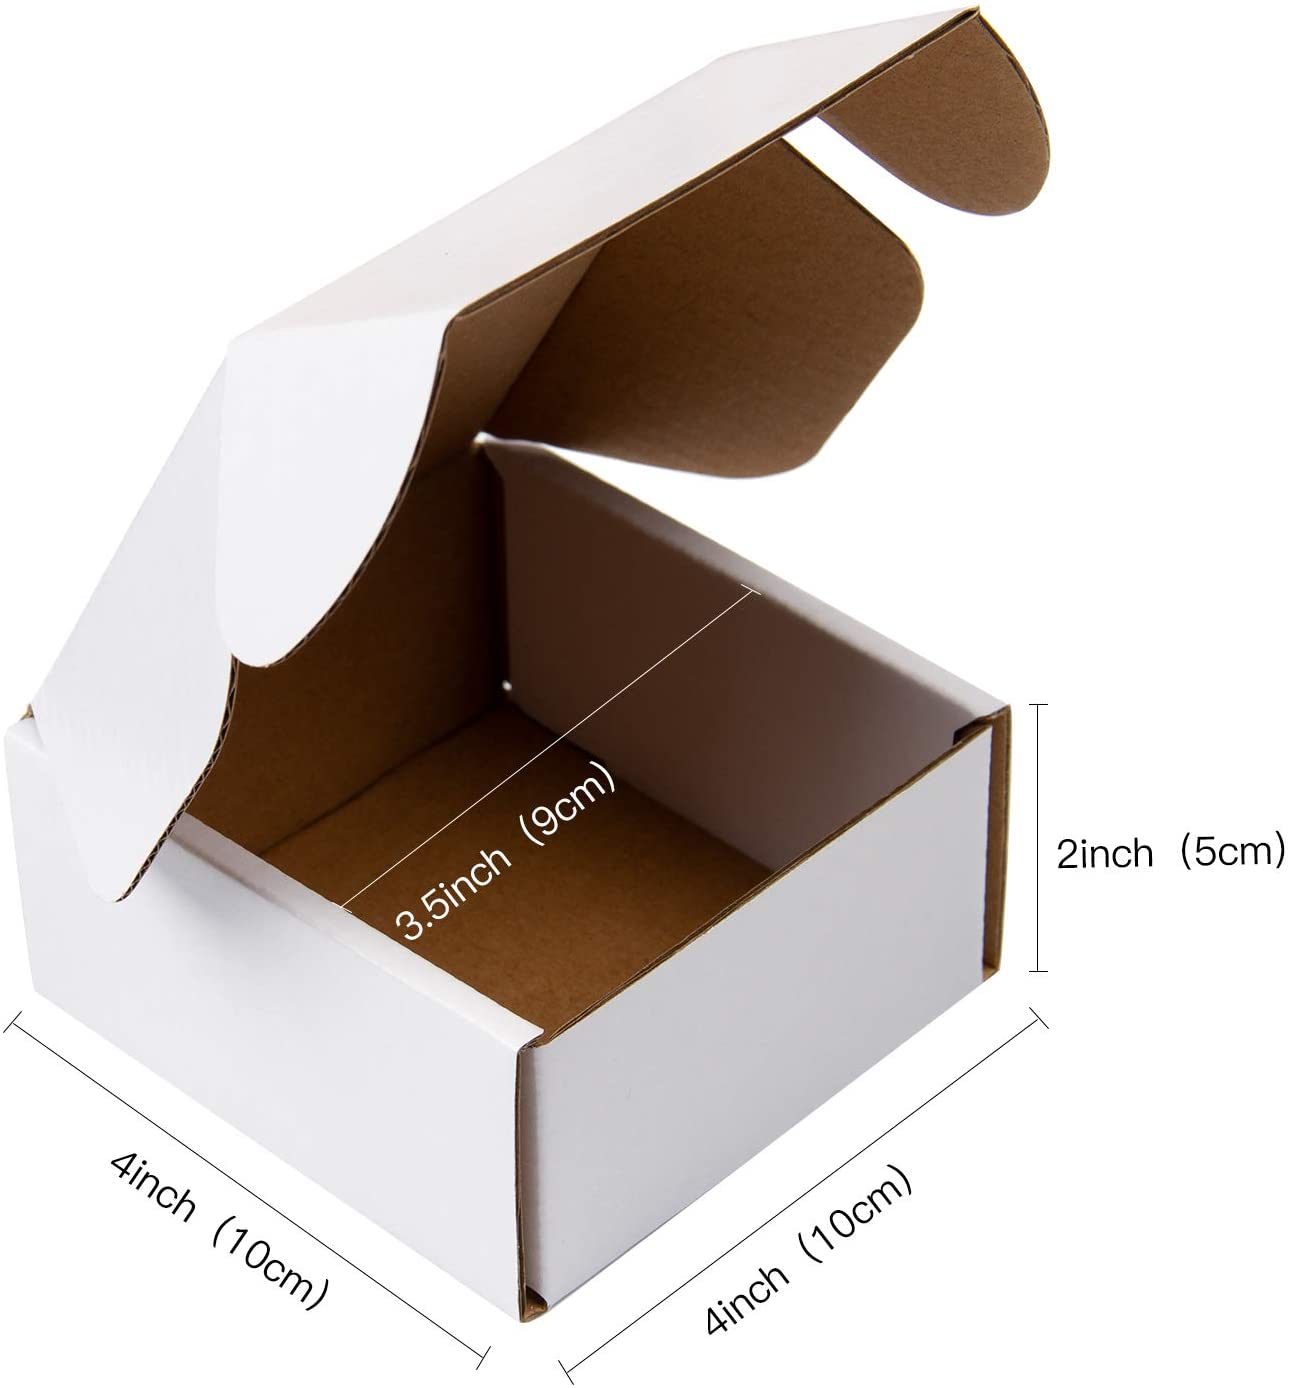 WRAPLA Recyclable Corrugated Box Mailers -10 X 10X 5 CM -White Cardboard Box Black Text Printed Shipping Small - 25 Pack